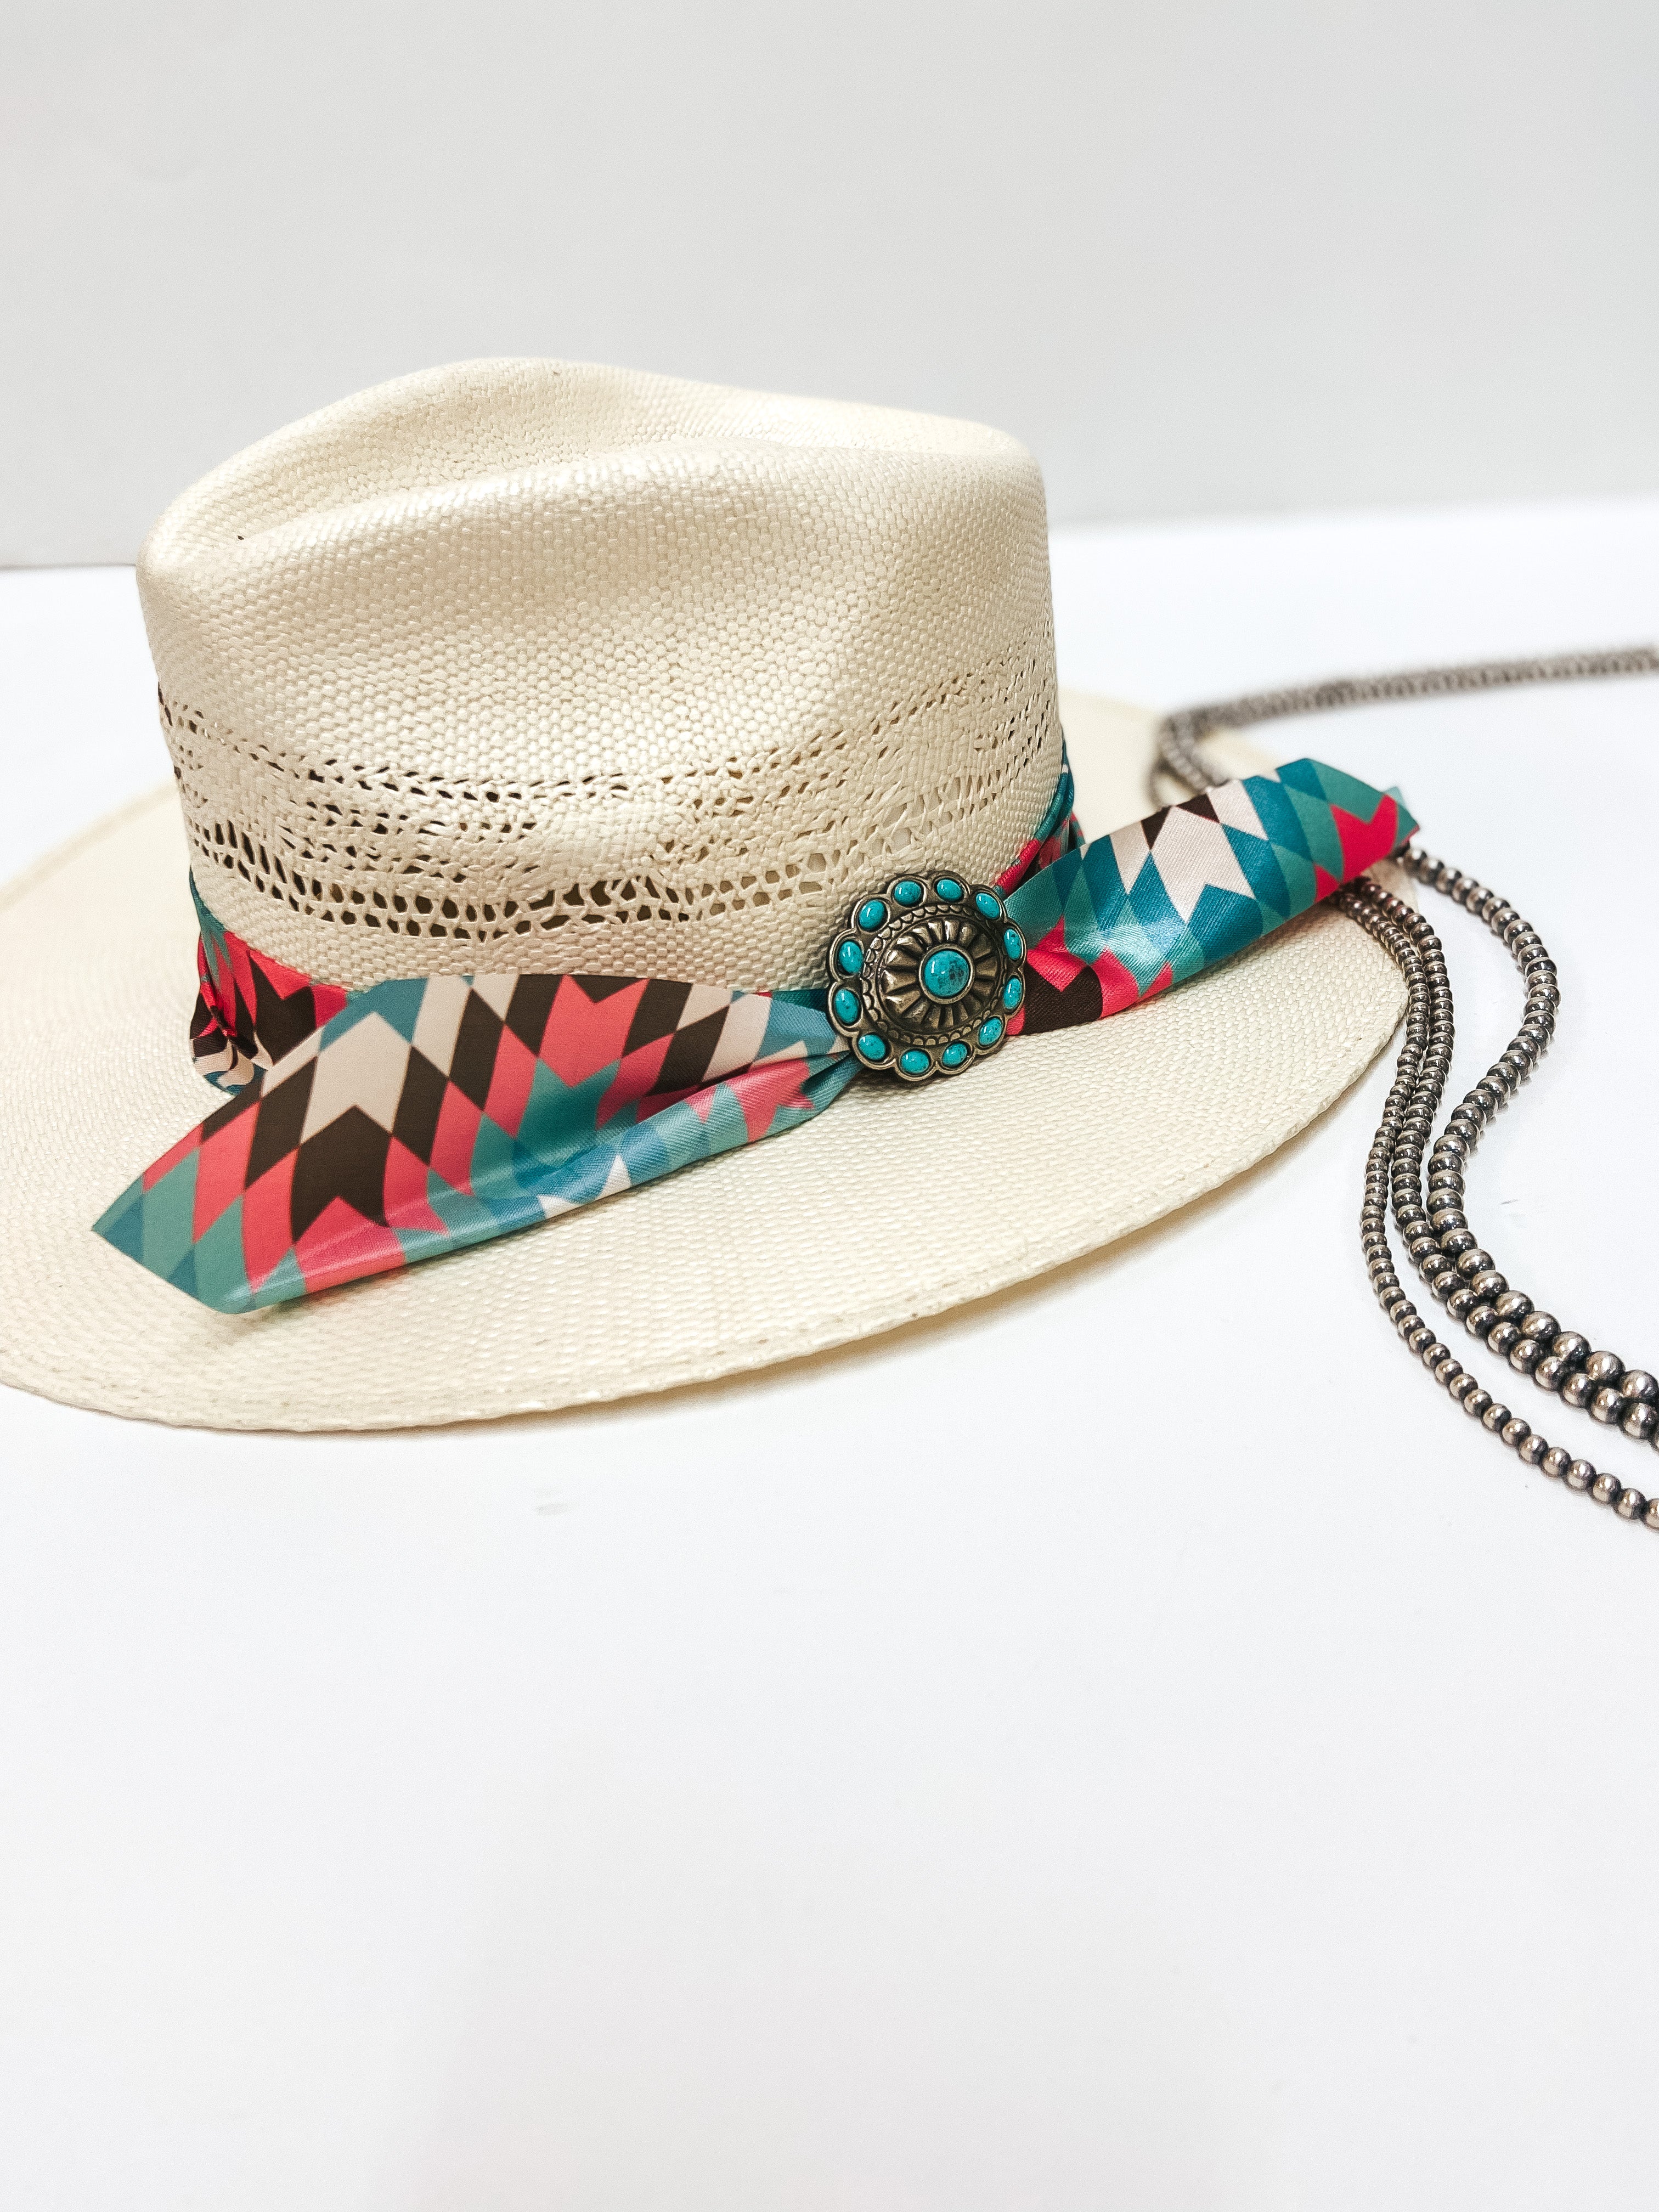 Charlie 1 Horse | Hissy Fit Straw Hat with Aztec Print Ribbon Band and Silver and Turquoise Concho Pin - Giddy Up Glamour Boutique